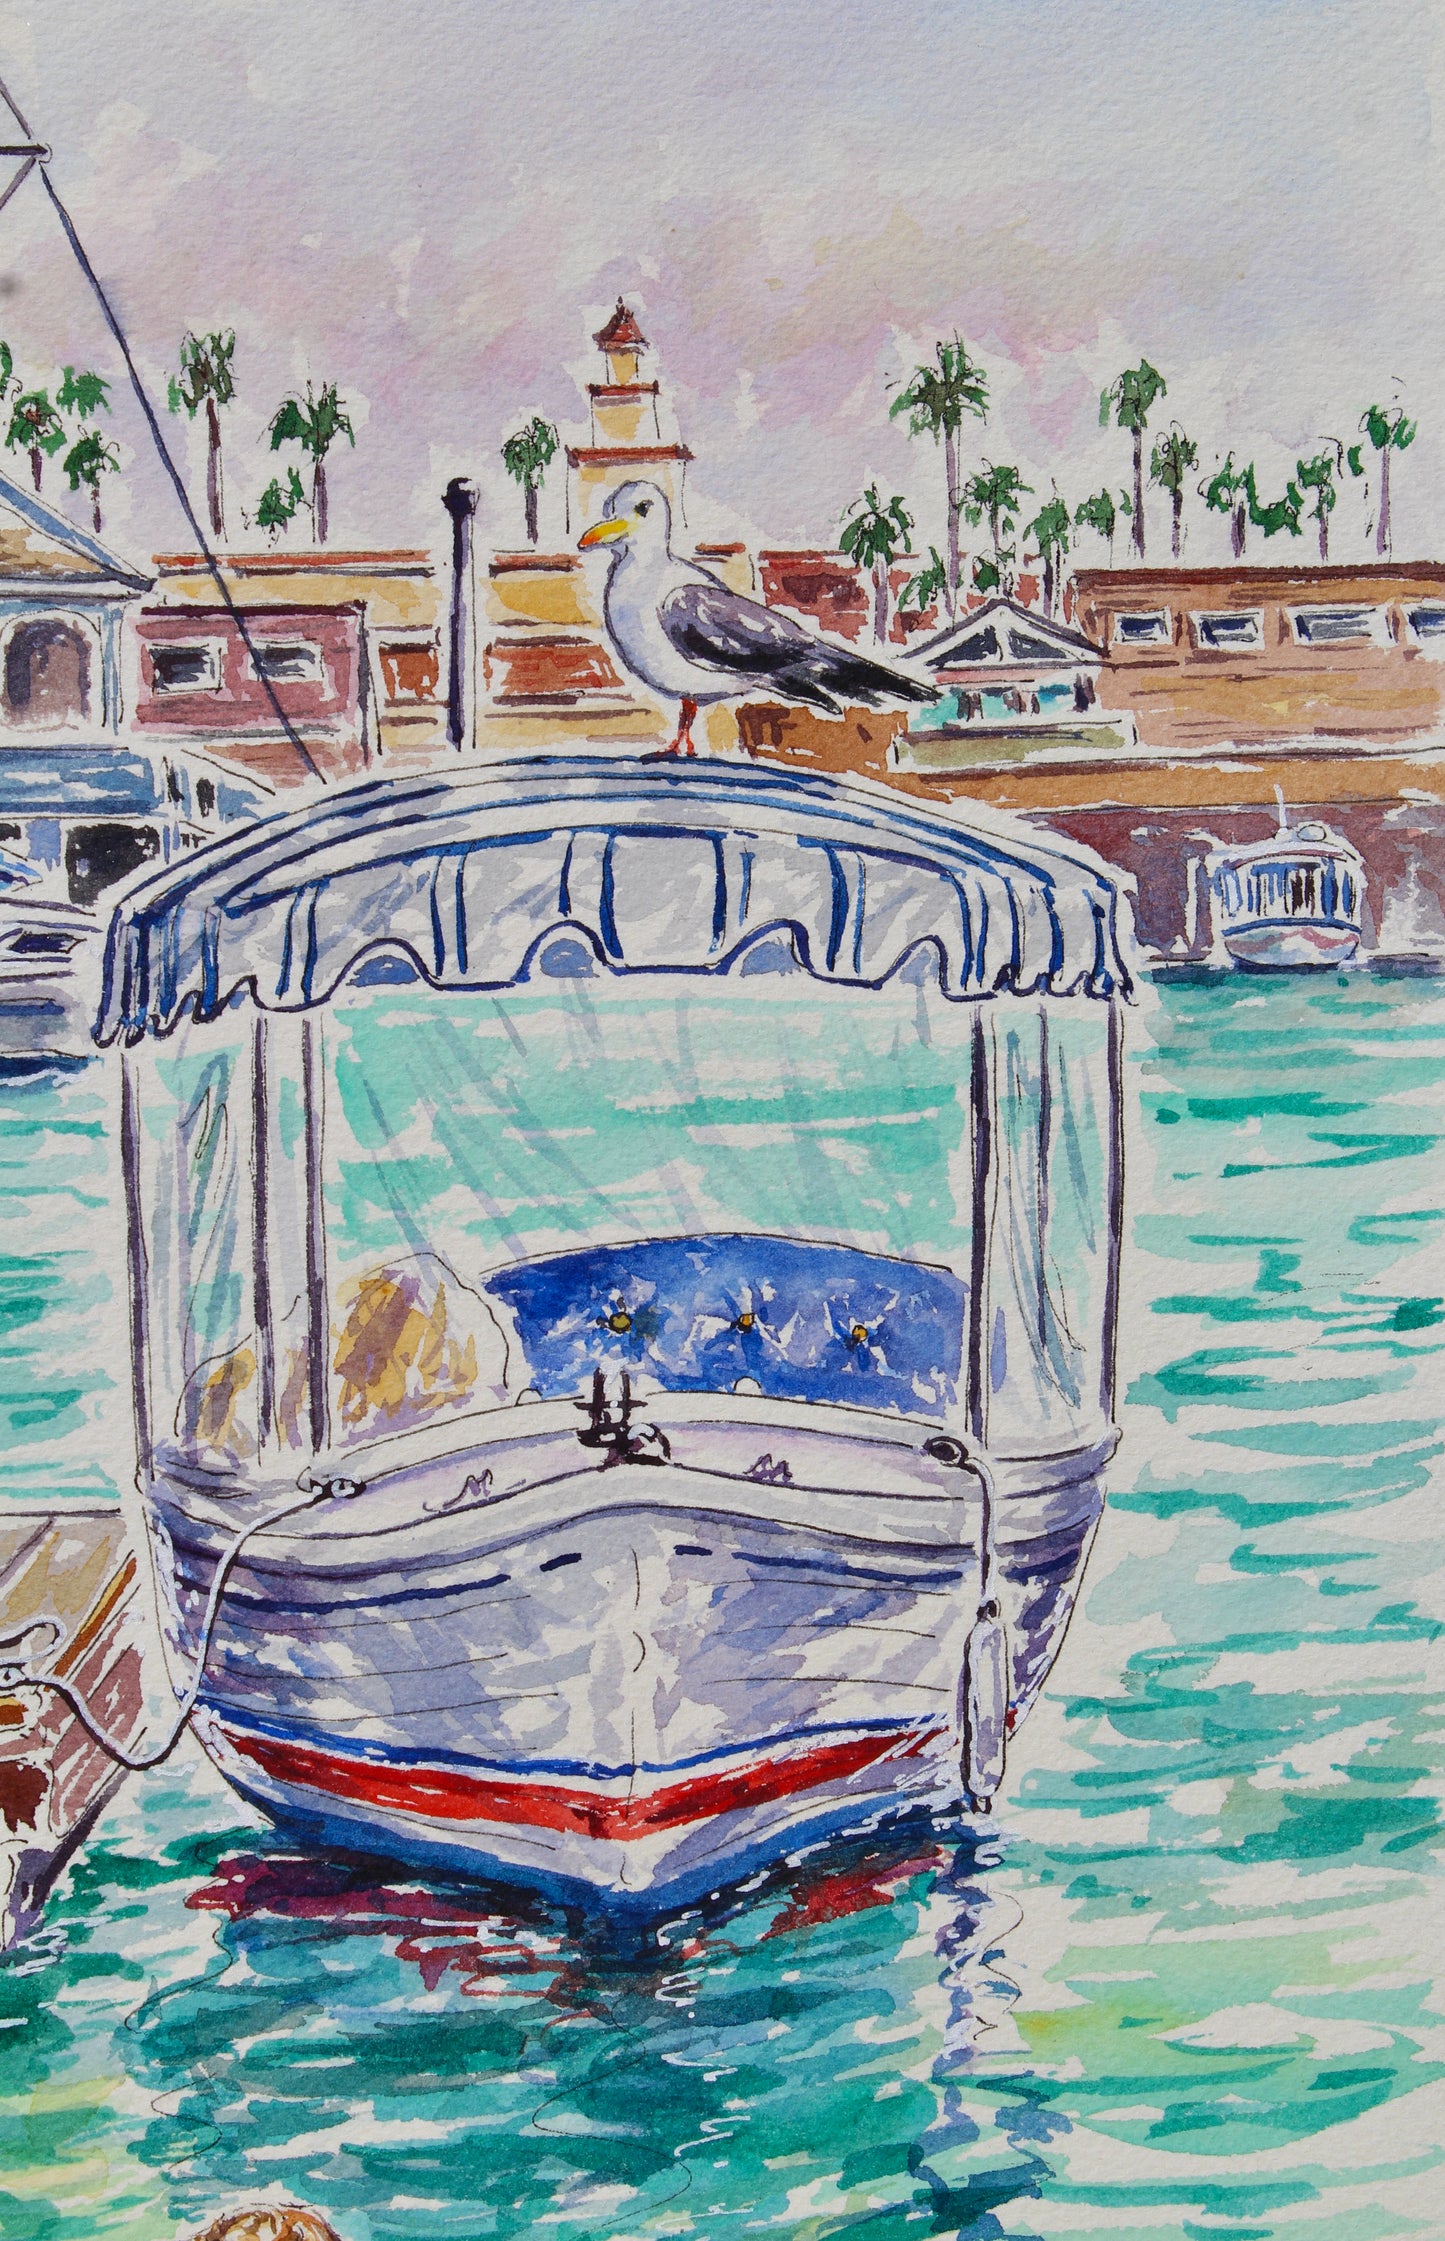 It's A Dog's Day On Balboa, An Original Watercolor And Ink Painting